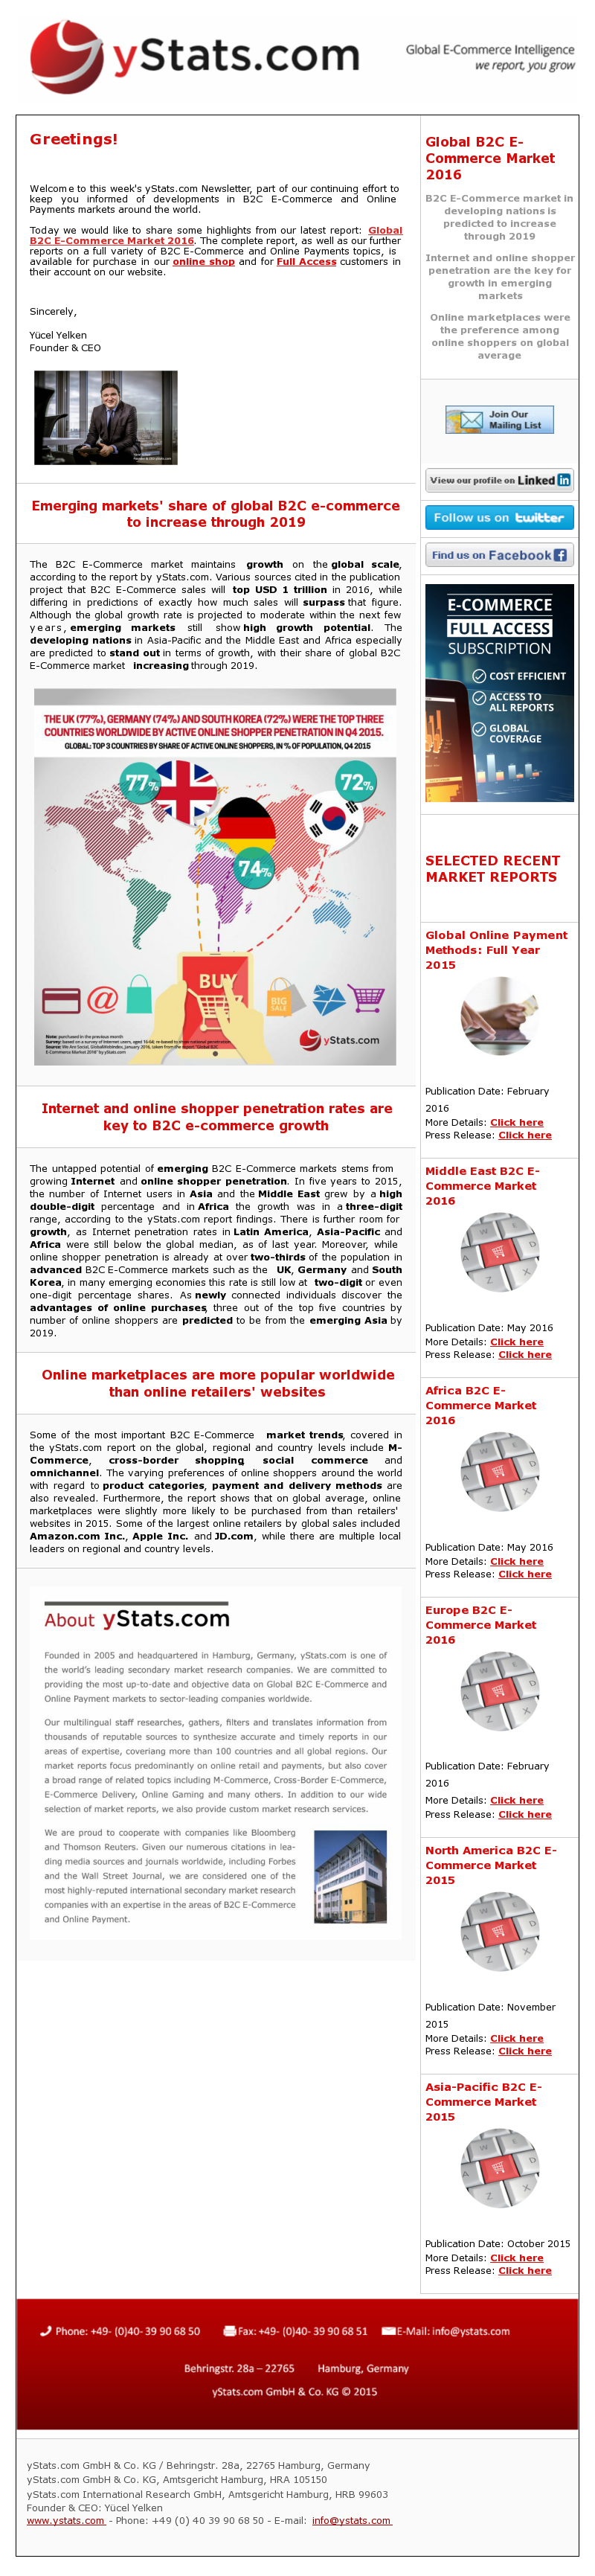 yStats.com Newsletter Global B2C E-Commerce Growth Rates Emerging Markets , Global B2C E-Commerce Market 2016 , market size , emerging markets , online marketplaces websites , online shoppers penetration rate , retail sales , e-commerce competitors , newsletter , Asia-Pacific , North America , Europe , Latin America , Middle East , Africa , online retail , 2016 The B2C E-Commerce market maintains growth on the global scale, according to the report by yStats.com. Various sources cited in the publication project that B2C E-Commerce sales will top USD 1 trillion in 2016, while differing in predictions of exactly how much sales will surpass that figure. Although the global growth rate is projected to moderate within the next few years, emerging markets still show high growth potential. The developing nations in Asia-Pacific and the Middle East and Africa especially are predicted to stand out in terms of growth, with their share of global B2C E-Commerce market increasing through 2019.

The untapped potential of emerging B2C E-Commerce markets stems from growing Internet and online shopper penetration. In five years to 2015, the number of Internet users in Asia and the Middle East grew by a high double-digit percentage and in Africa the growth was in a three-digit range, according to the yStats.com report findings. There is further room for growth, as Internet penetration rates in Latin America, Asia-Pacific and Africa were still below the global median, as of last year. Moreover, while online shopper penetration is already at over two-thirds of the population in advanced B2C E-Commerce markets such as the UK, Germany and South Korea, in many emerging economies this rate is still low at two-digit or even one-digit percentage shares. As newly connected individuals discover the advantages of online purchases, three out of the top five countries by number of online shoppers are predicted to be from the emerging Asia by 2019.

Some of the most important B2C E-Commerce market trends, covered in the yStats.com report on the global, regional and country levels include M-Commerce, cross-border shopping, social commerce and omnichannel. The varying preferences of online shoppers around the world with regard to product categories, payment and delivery methods are also revealed. Furthermore, the report shows that on global average, online marketplaces were slightly more likely to be purchased from than retailers’ websites in 2015. Some of the largest online retailers by global sales included Amazon.com Inc., Apple Inc. and JD.com, while there are multiple local leaders on regional and country levels.